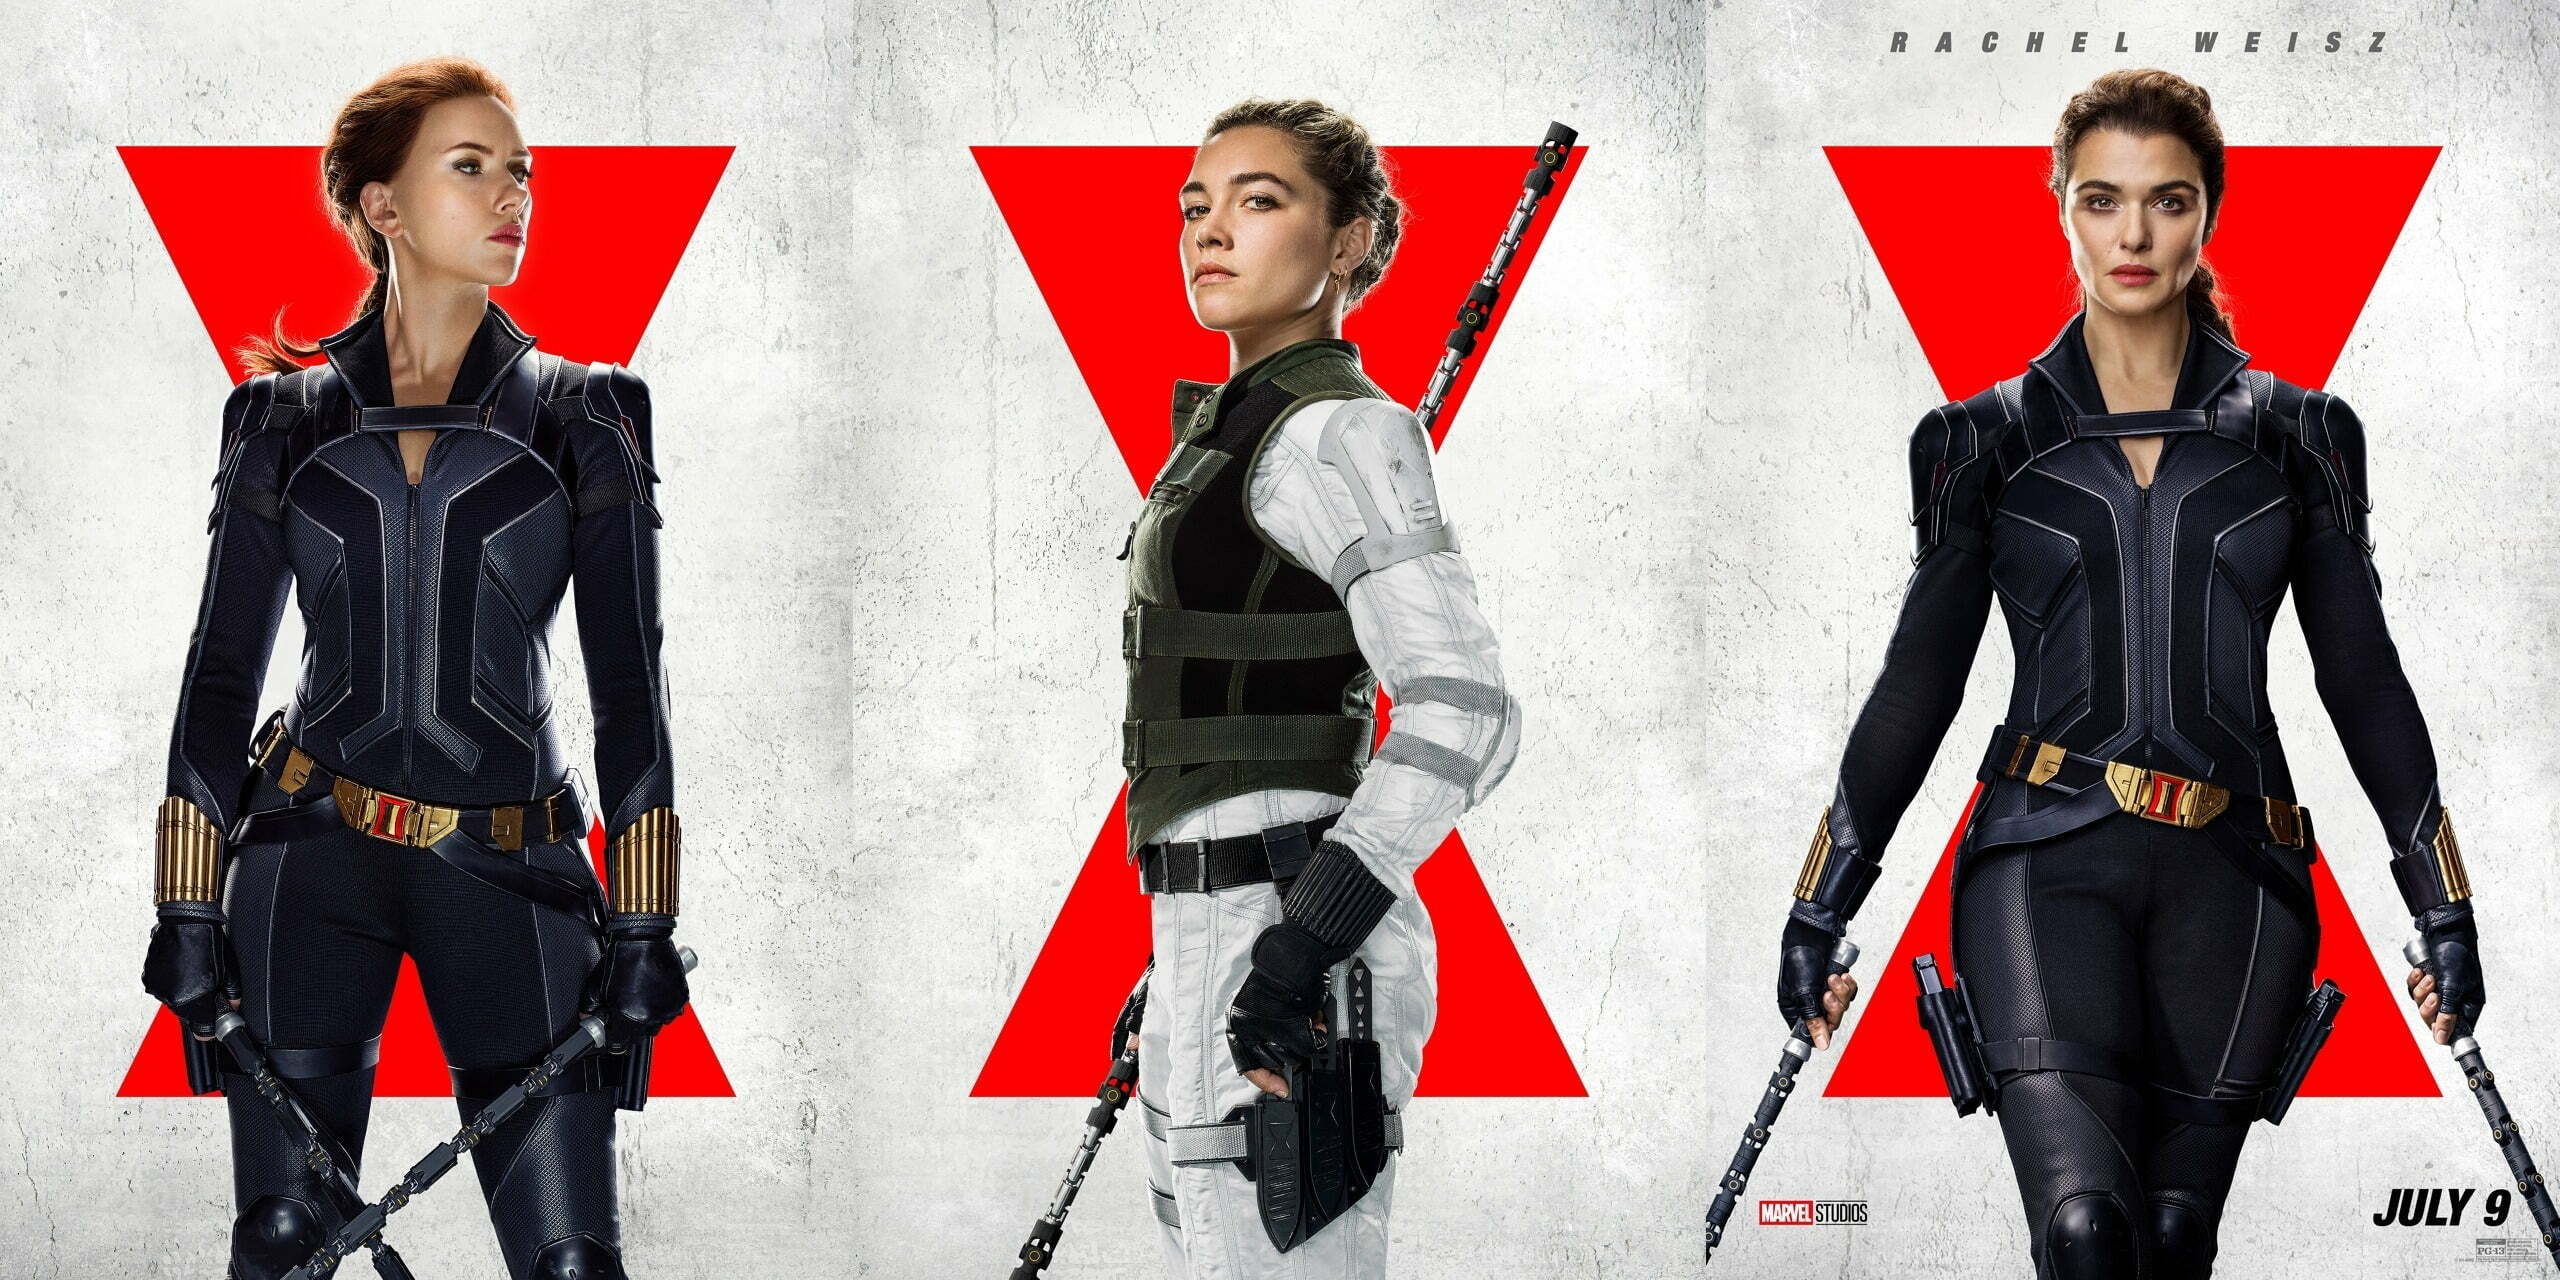 I can't wait to stroke my dick to all the female empowerment on screen in the Black Widow movie. [Scarlett Johansson, Florence Pugh, and Rachel Weisz]